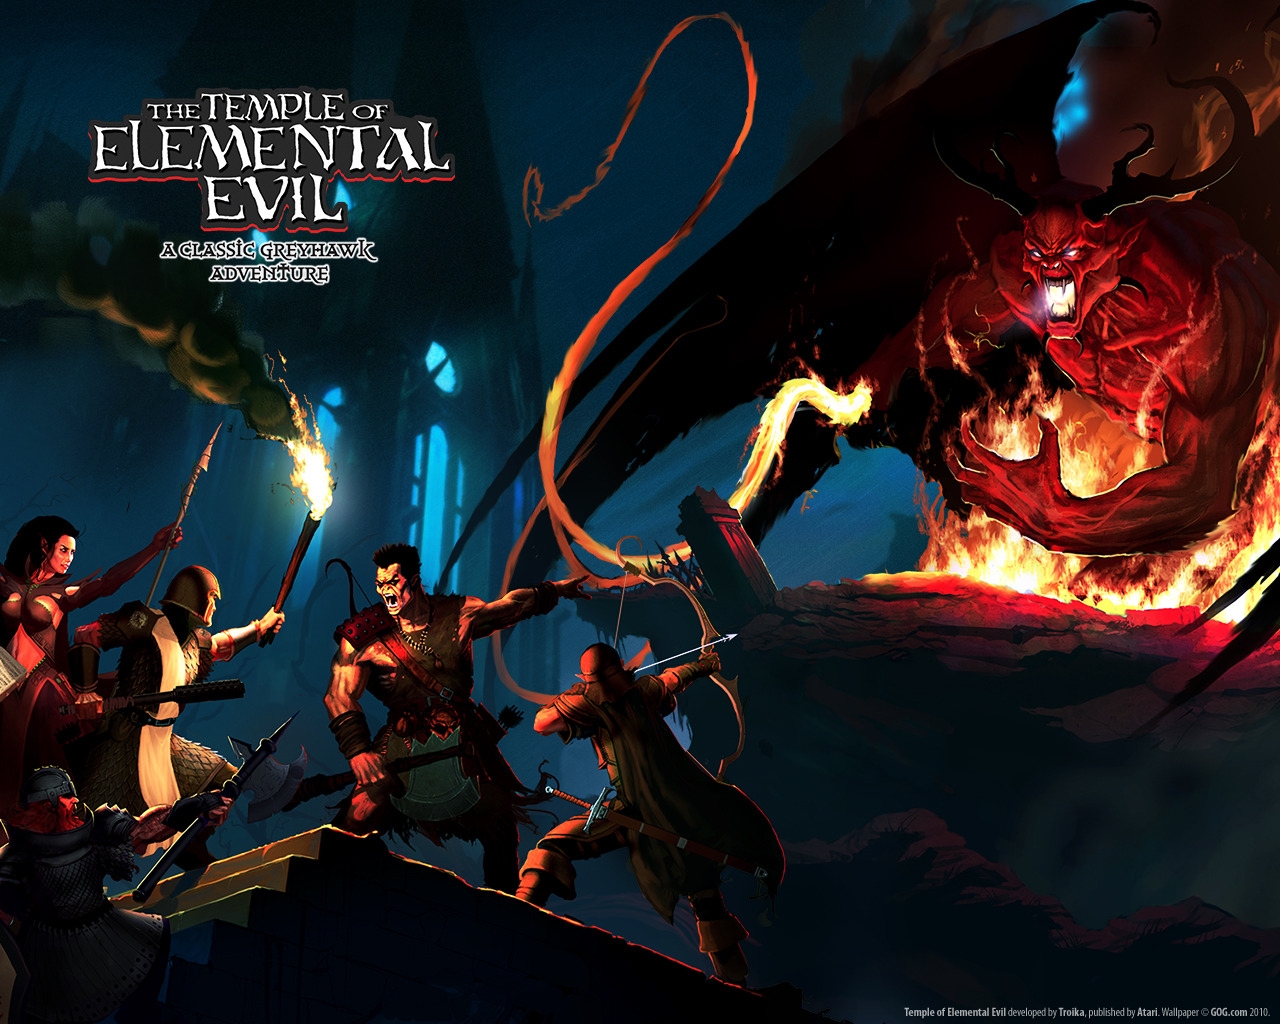 The Temple Of Elemental Evil for 1280 x 1024 resolution